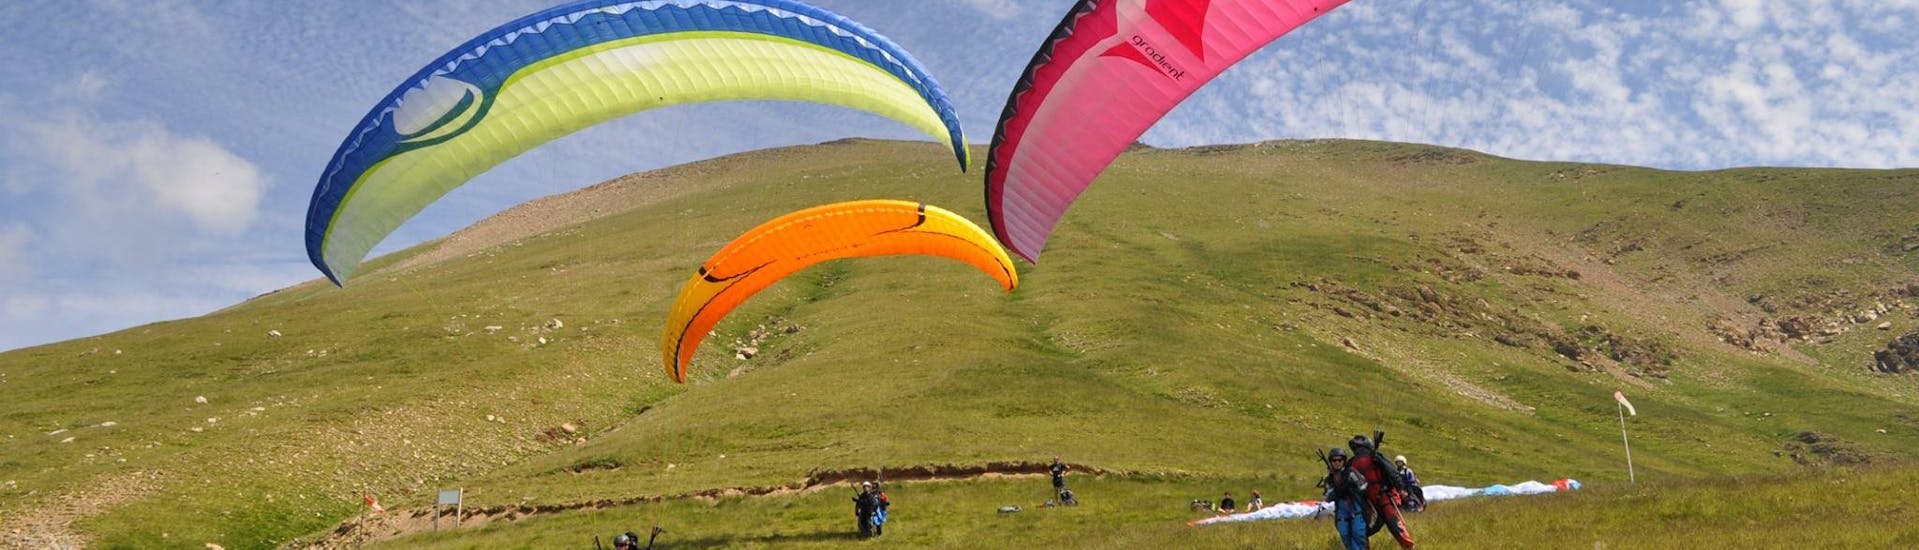 Three people are taking off with the paragliding with Parapente Pirineos in the village of Castejón de Sos.